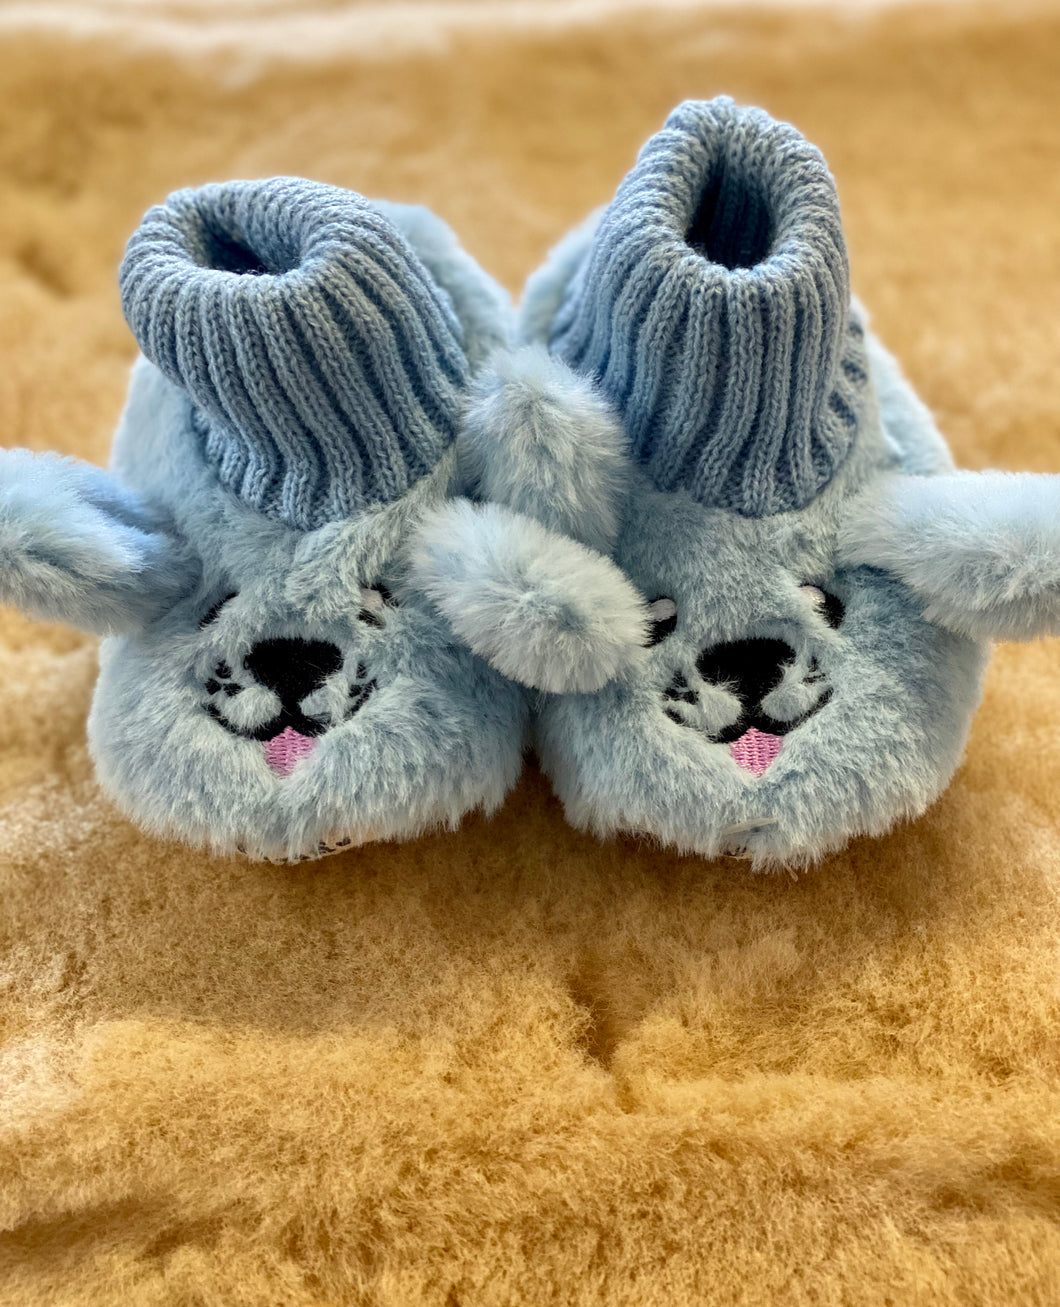 SnuggUps Non-Slip Slippers For Toddlers - Blue Dog